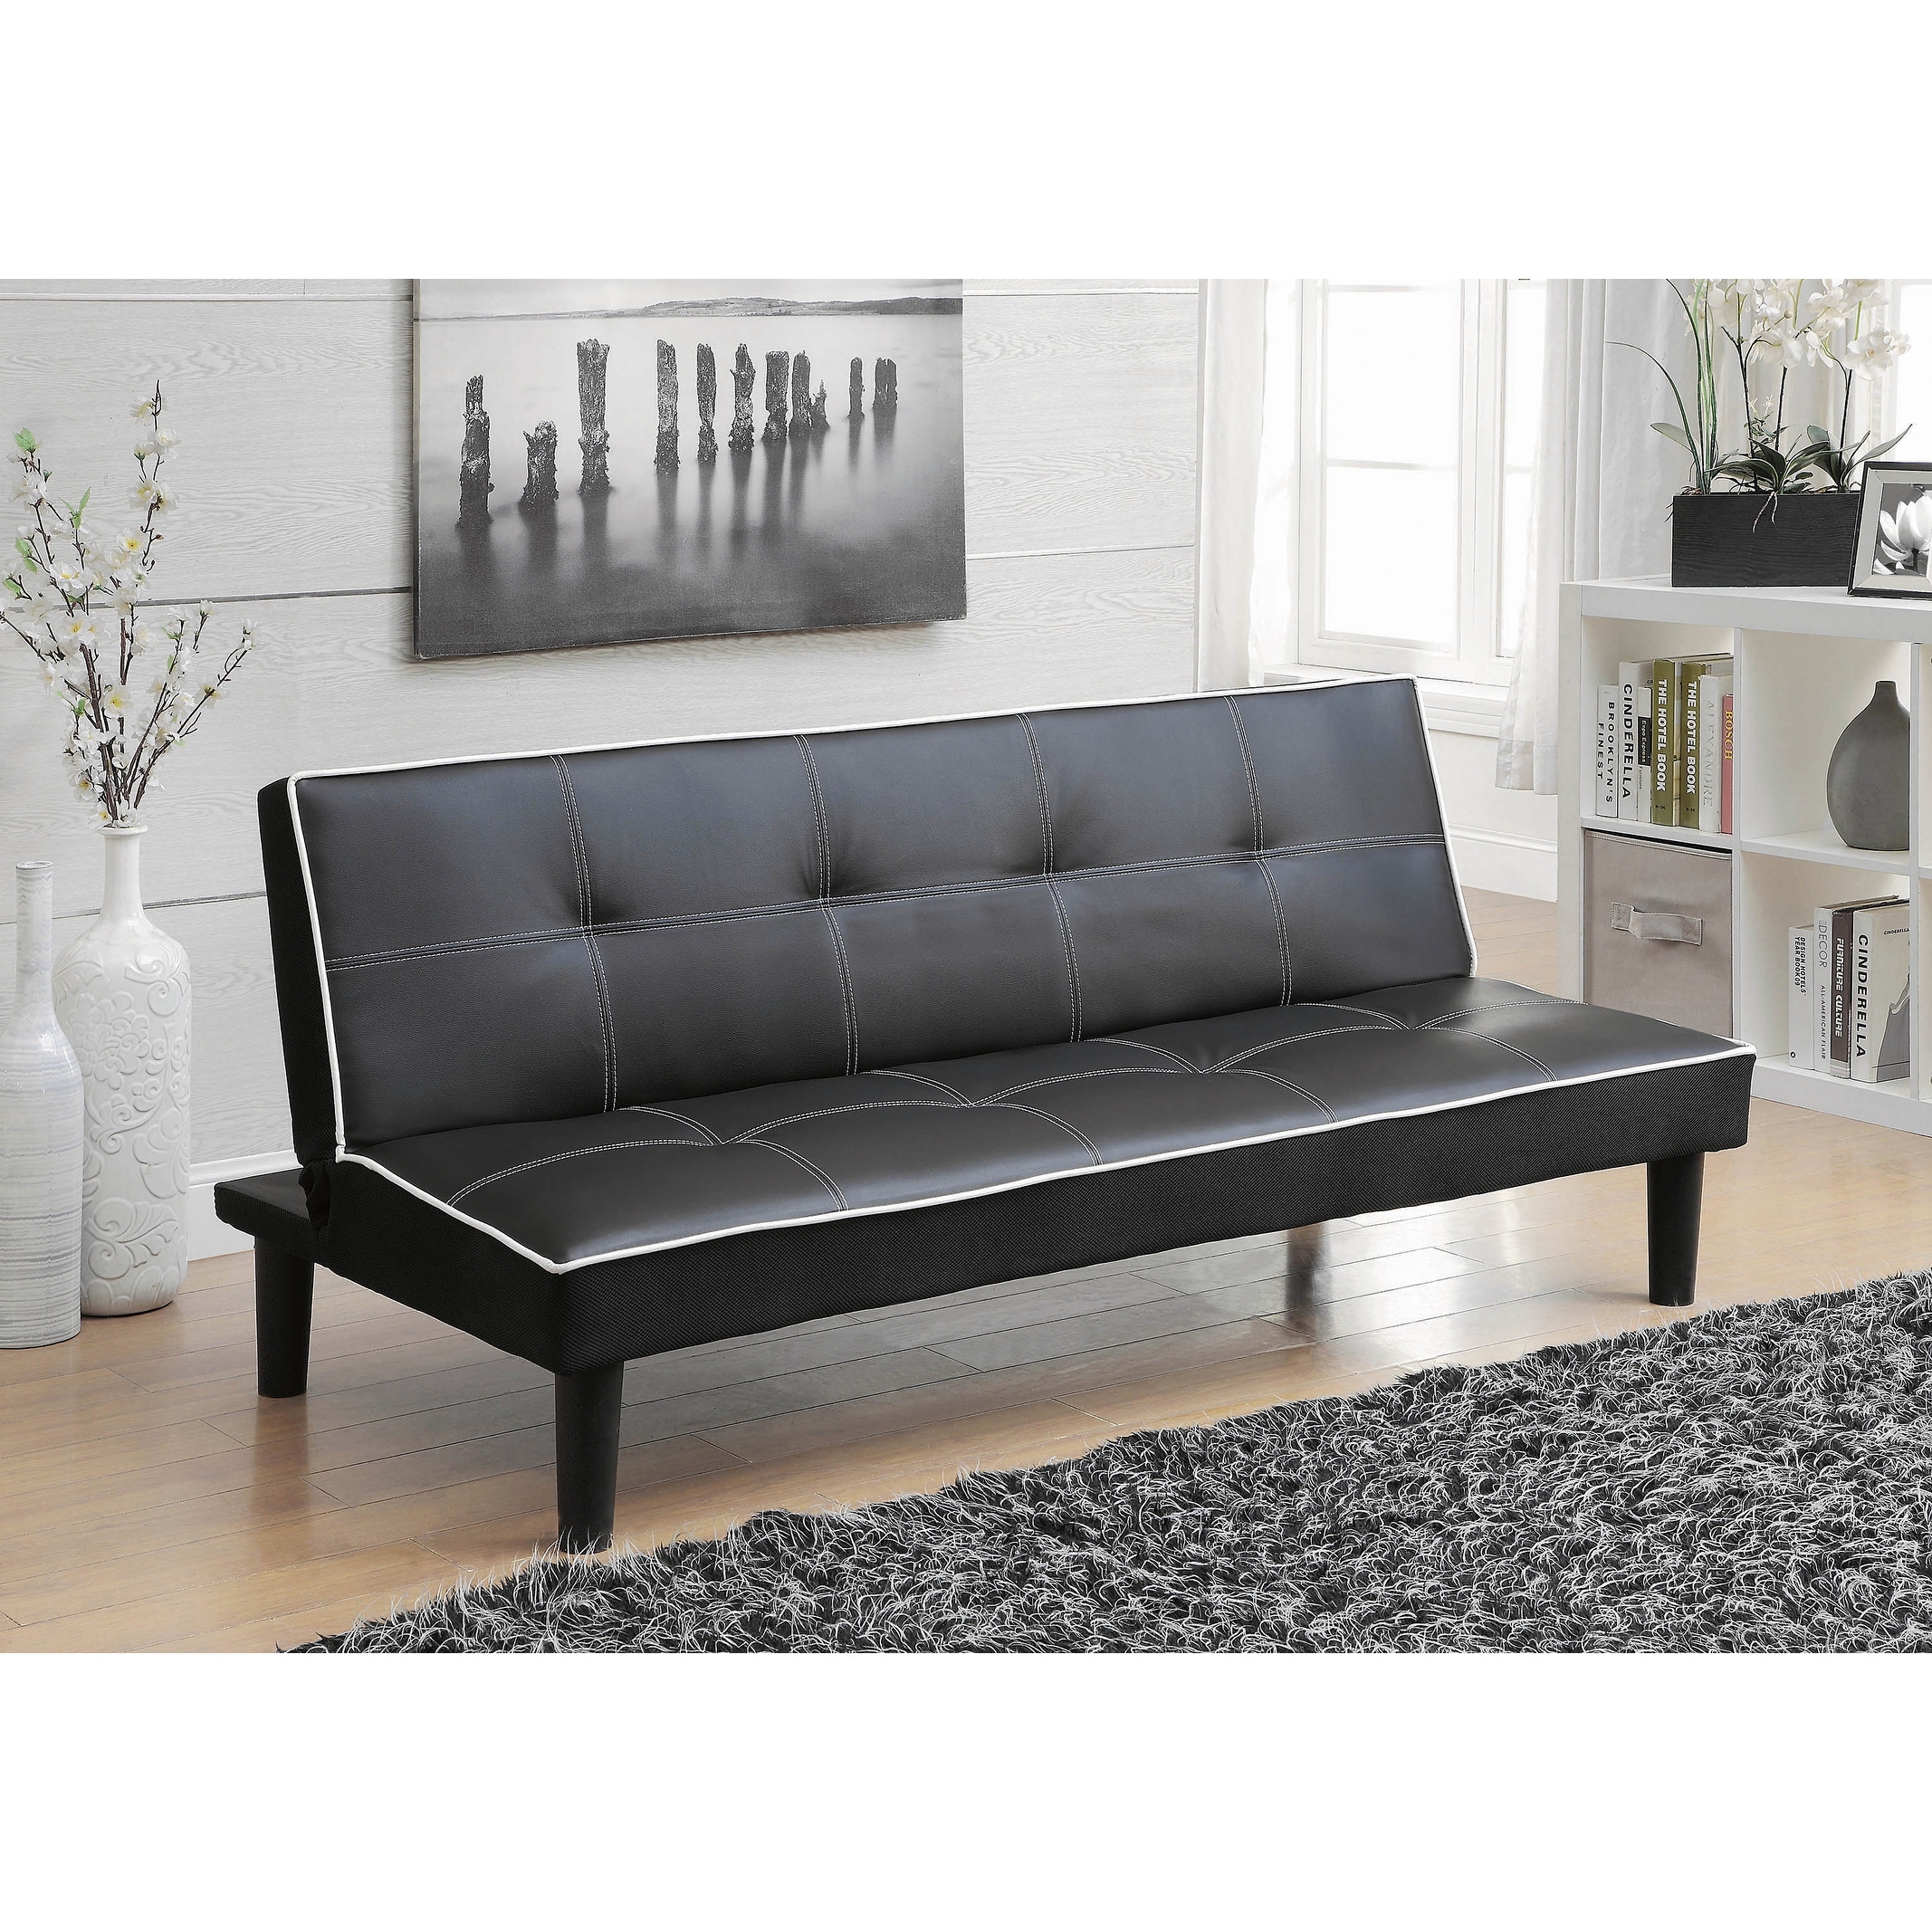 CDecor Cranston Black Armless Sofa Bed with Contrast Piping